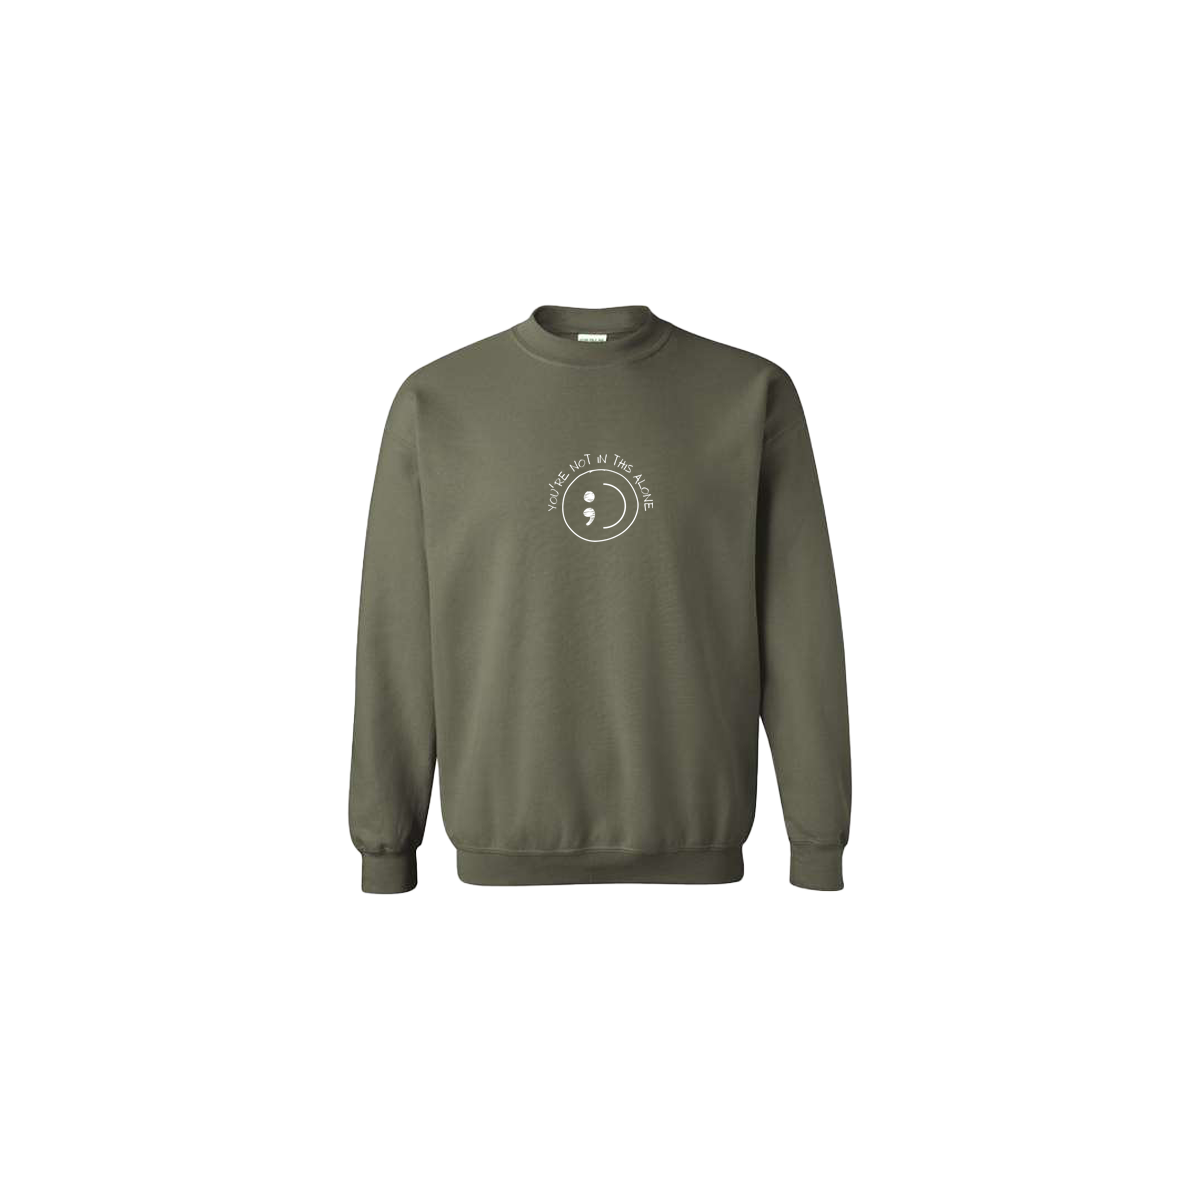 You're Not In This Alone Embroidered ArmyGreen Crewneck - Mental Health Awareness Clothing